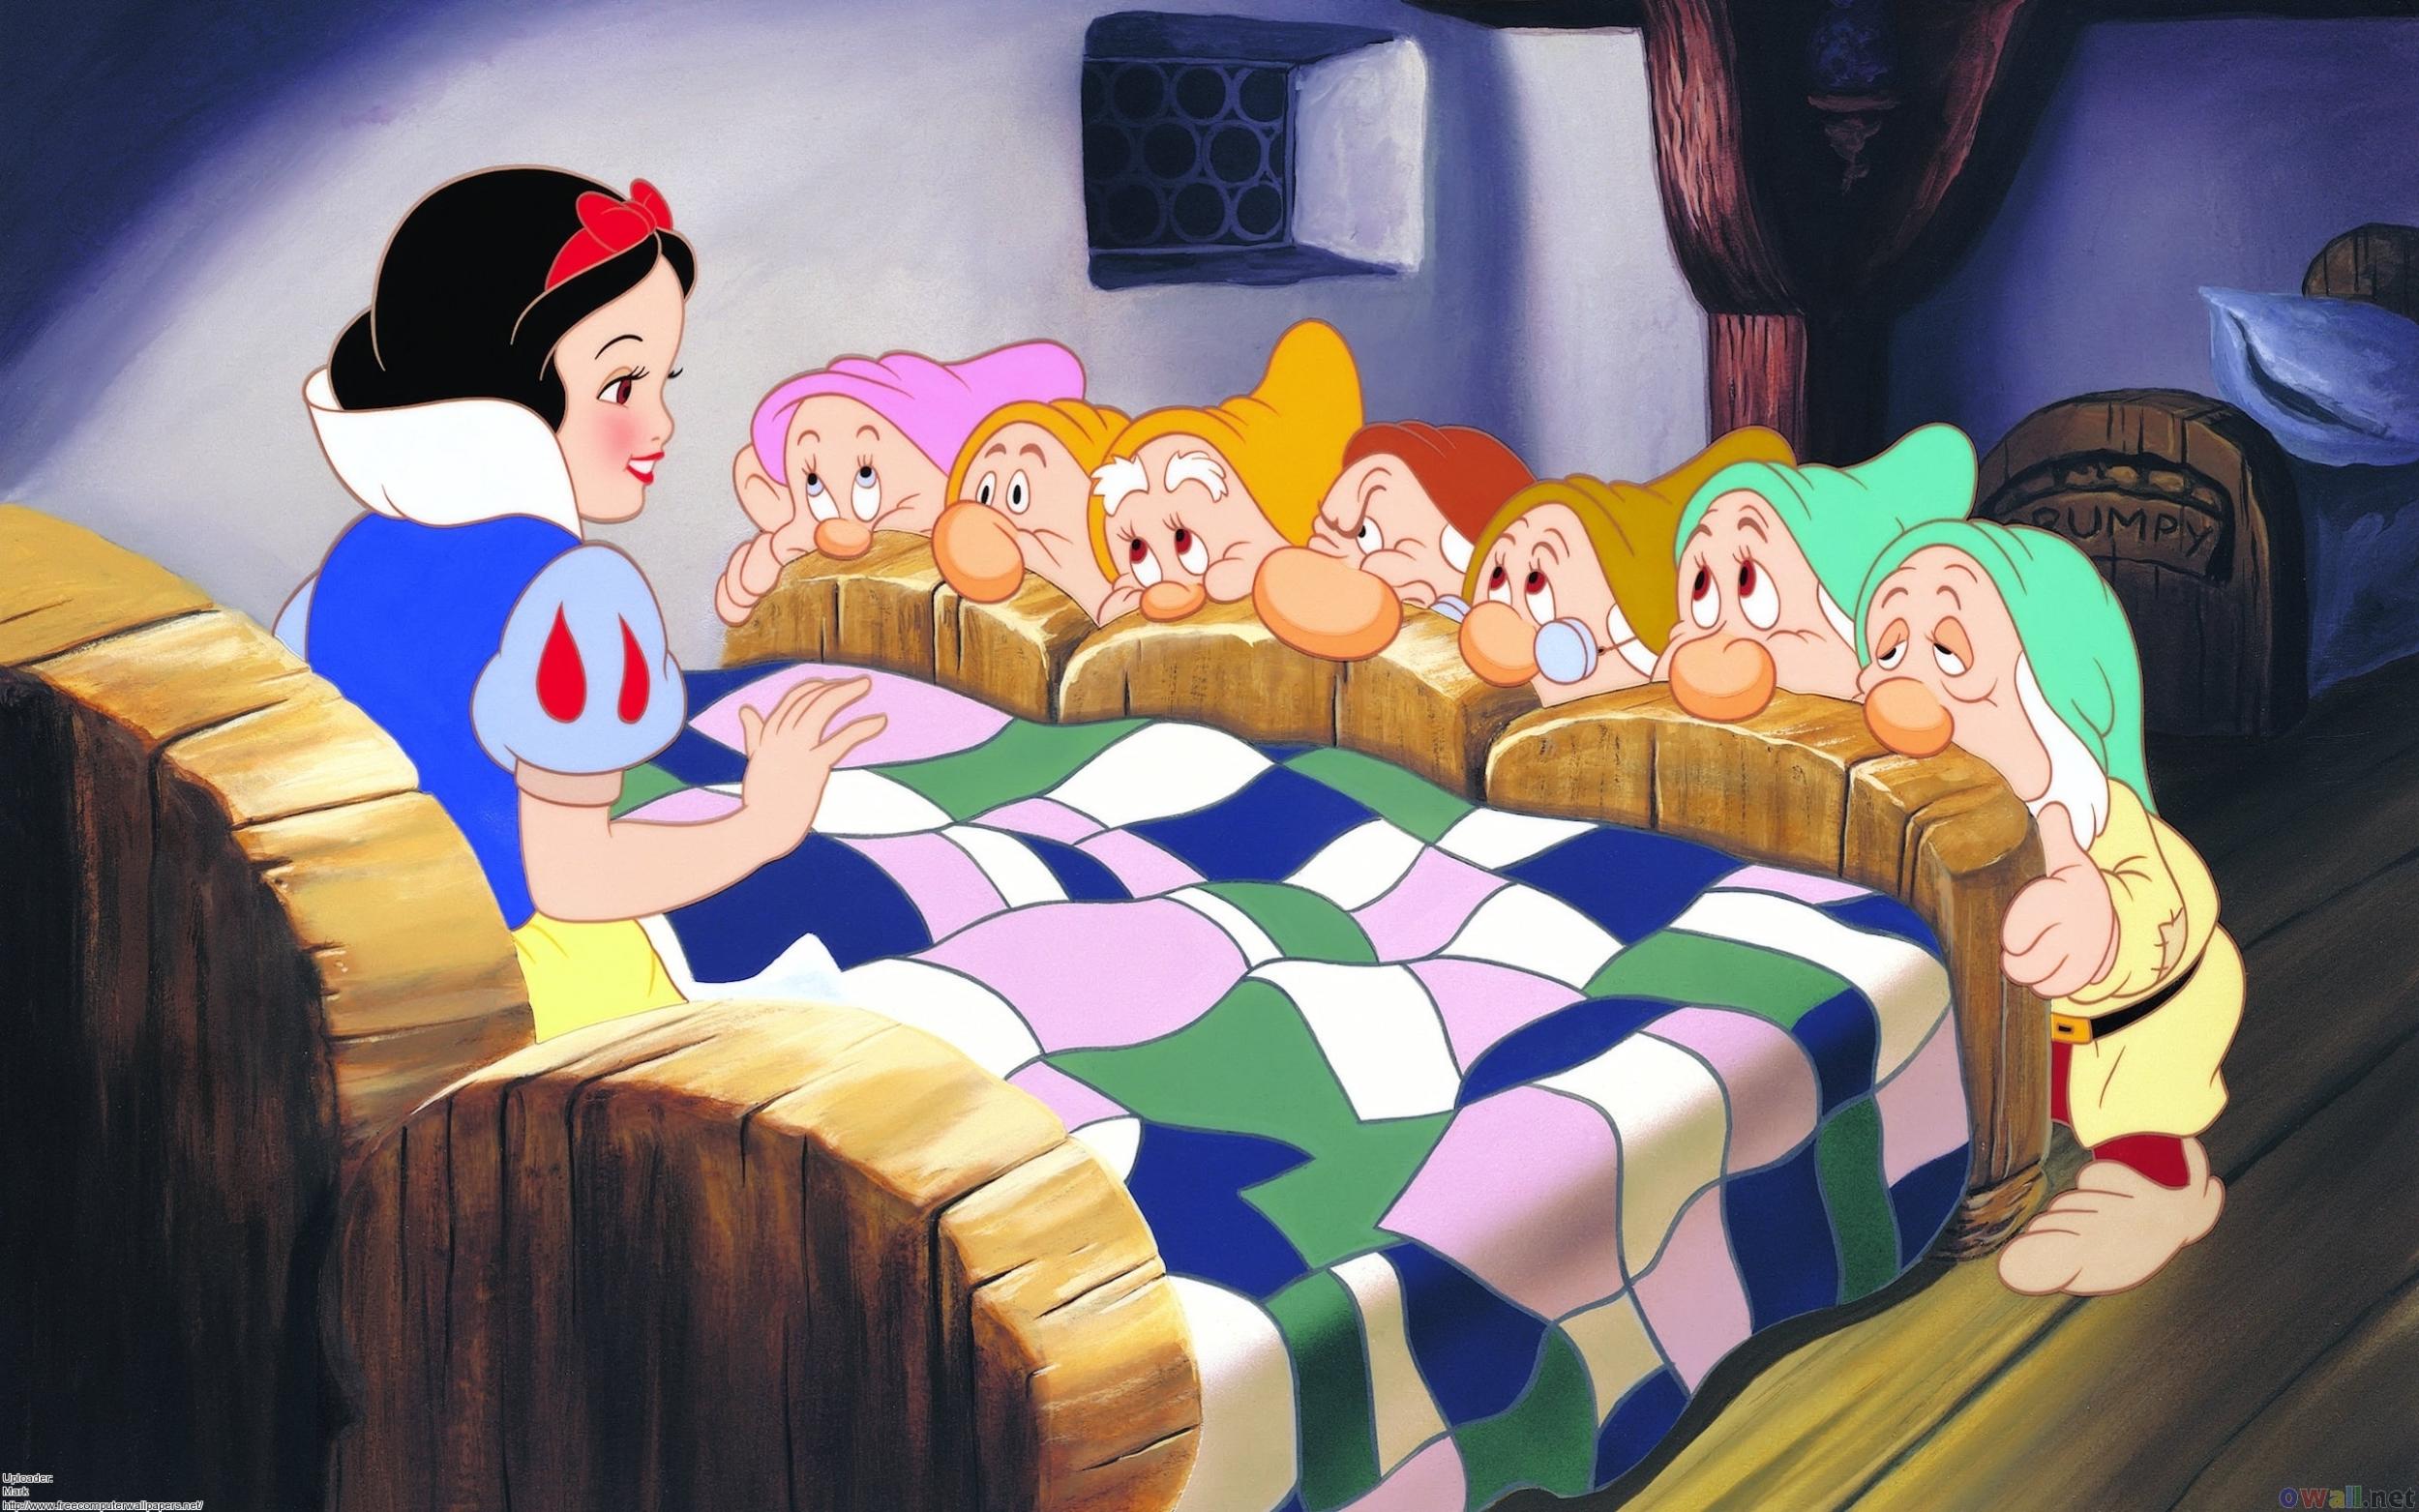 Is Snow White a sexual assault victim? Feminist professor argues some fairytales promote 'sexual acts on an unconscious partner'